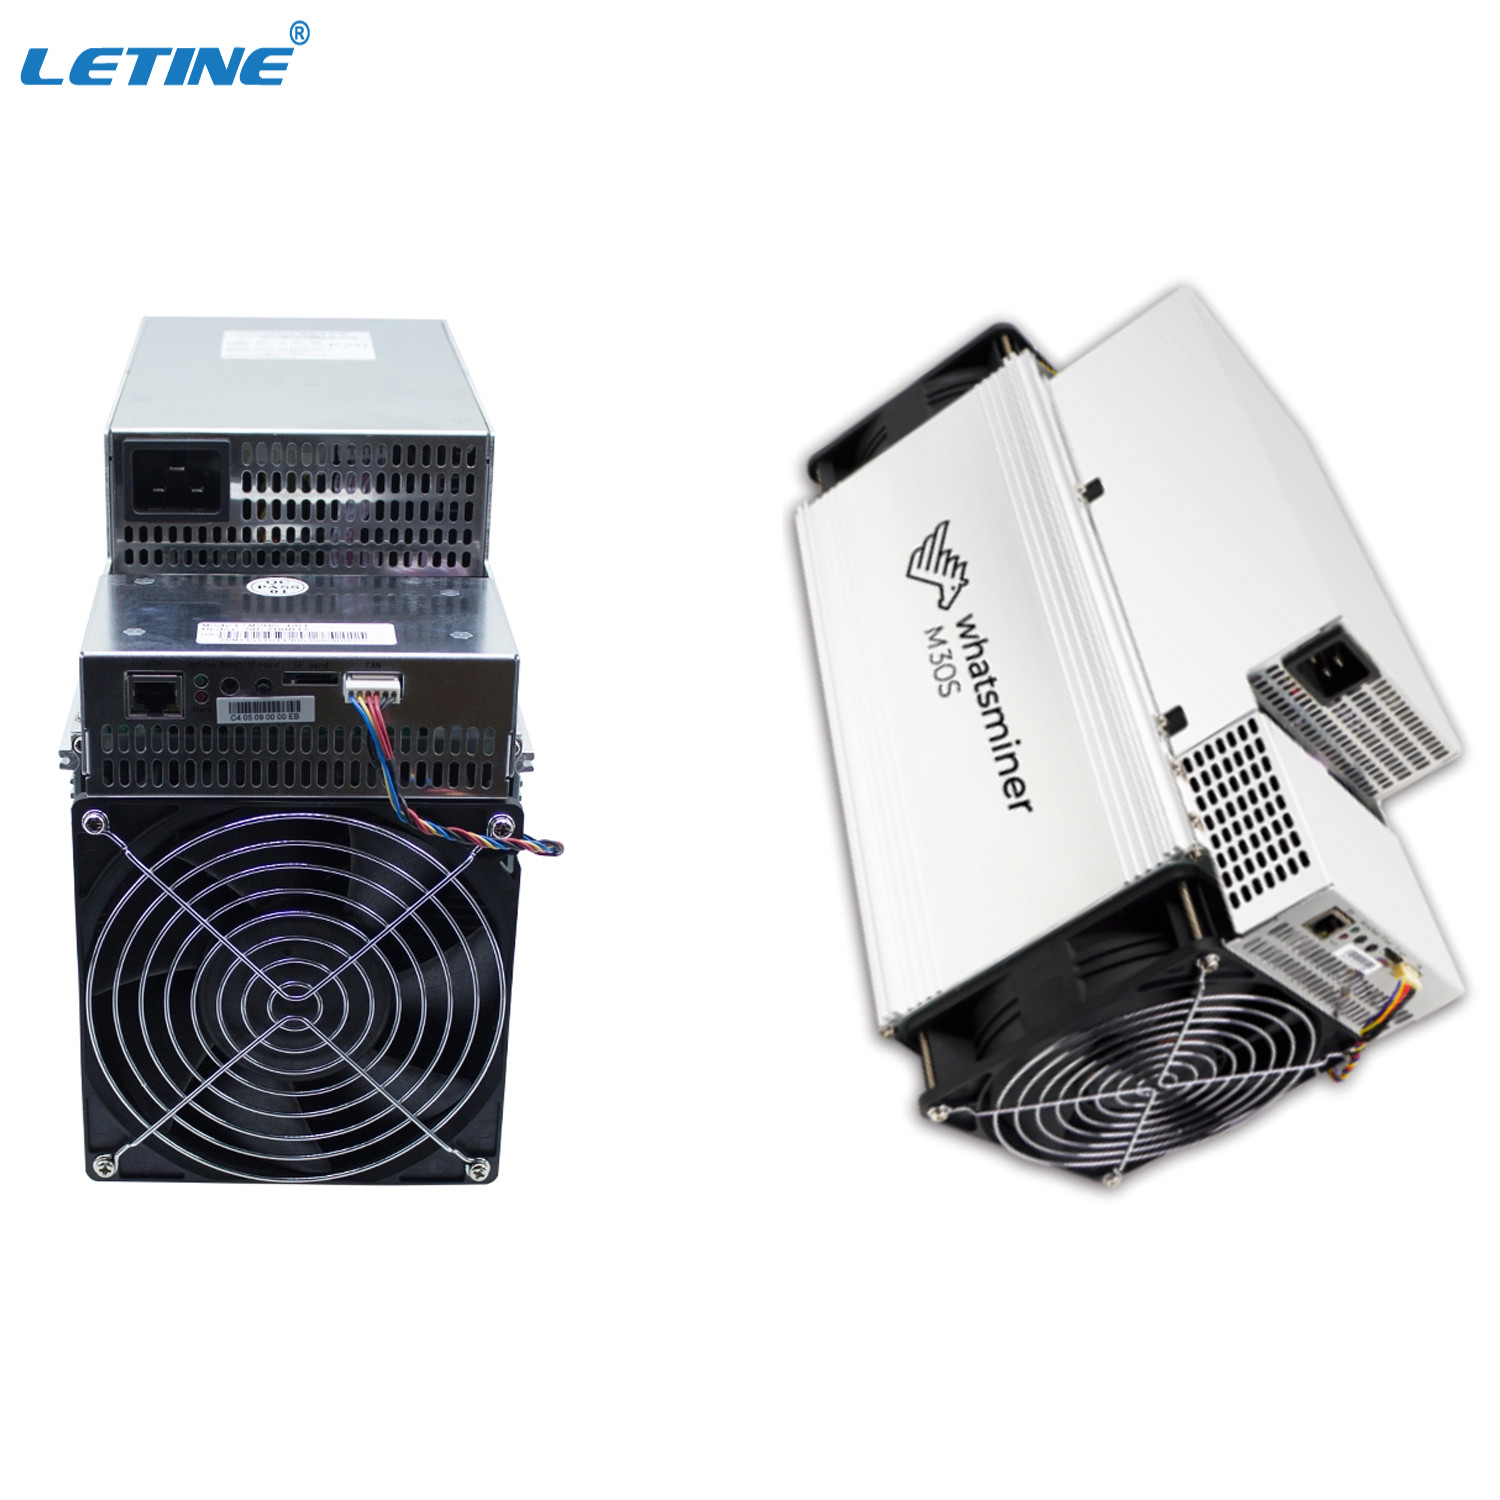 China MicroBT Whatsminer M21s M20s M32 M30 M31s 80th M30s 88t M30S+ 100T 102T 104T M30S++ 110T Bitcoin Mining Crypto Equipment on sale